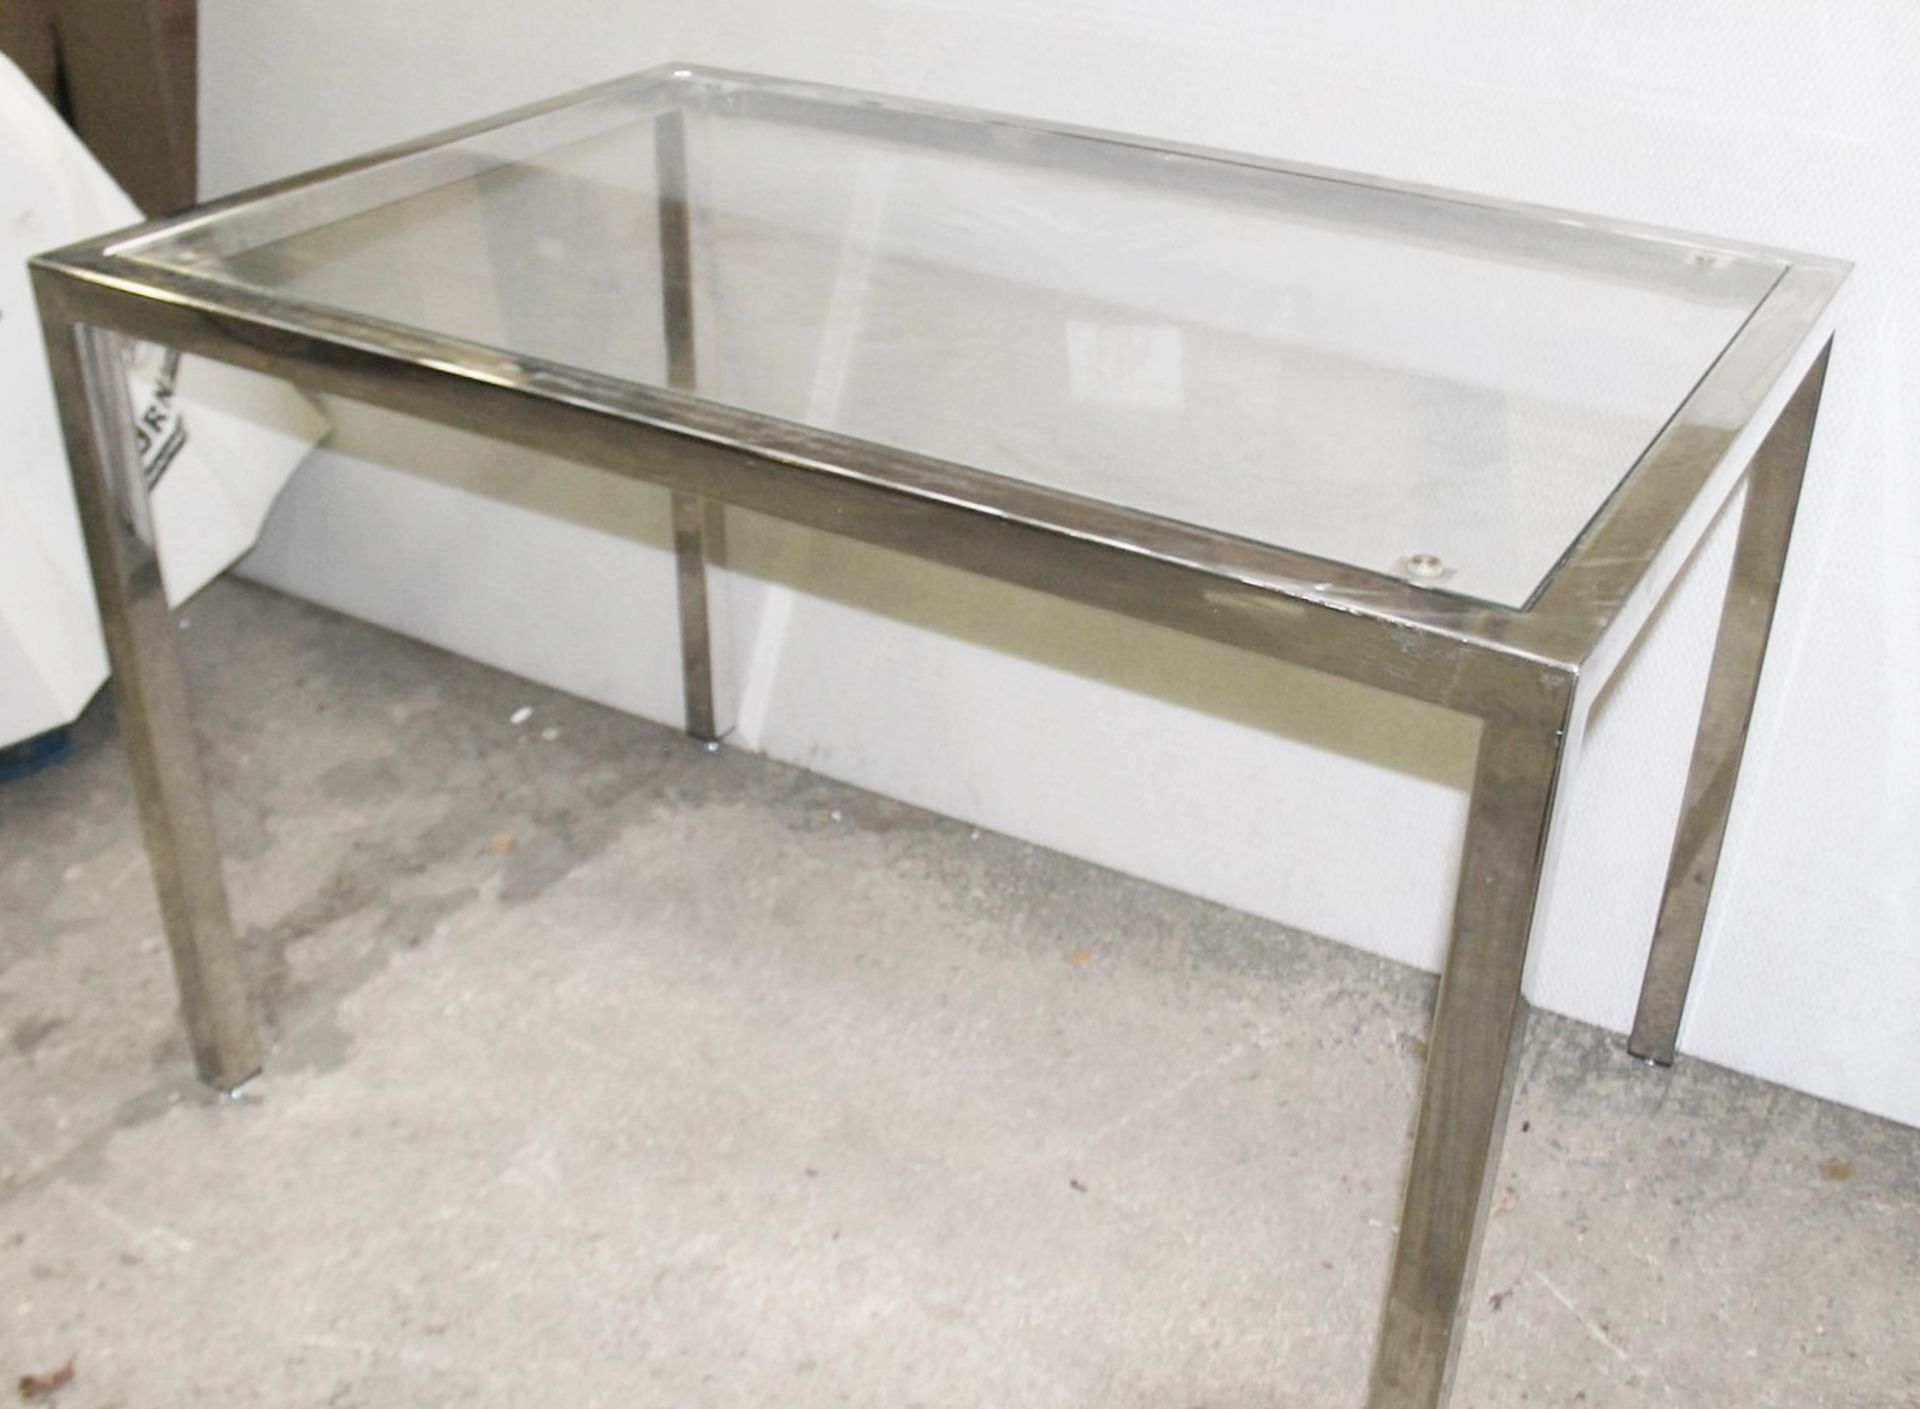 1 x Large Display Table In Glass And Chrome - Dimensions: H91 x W135 x D90cm - Ex-Showroom Piece - - Image 5 of 6